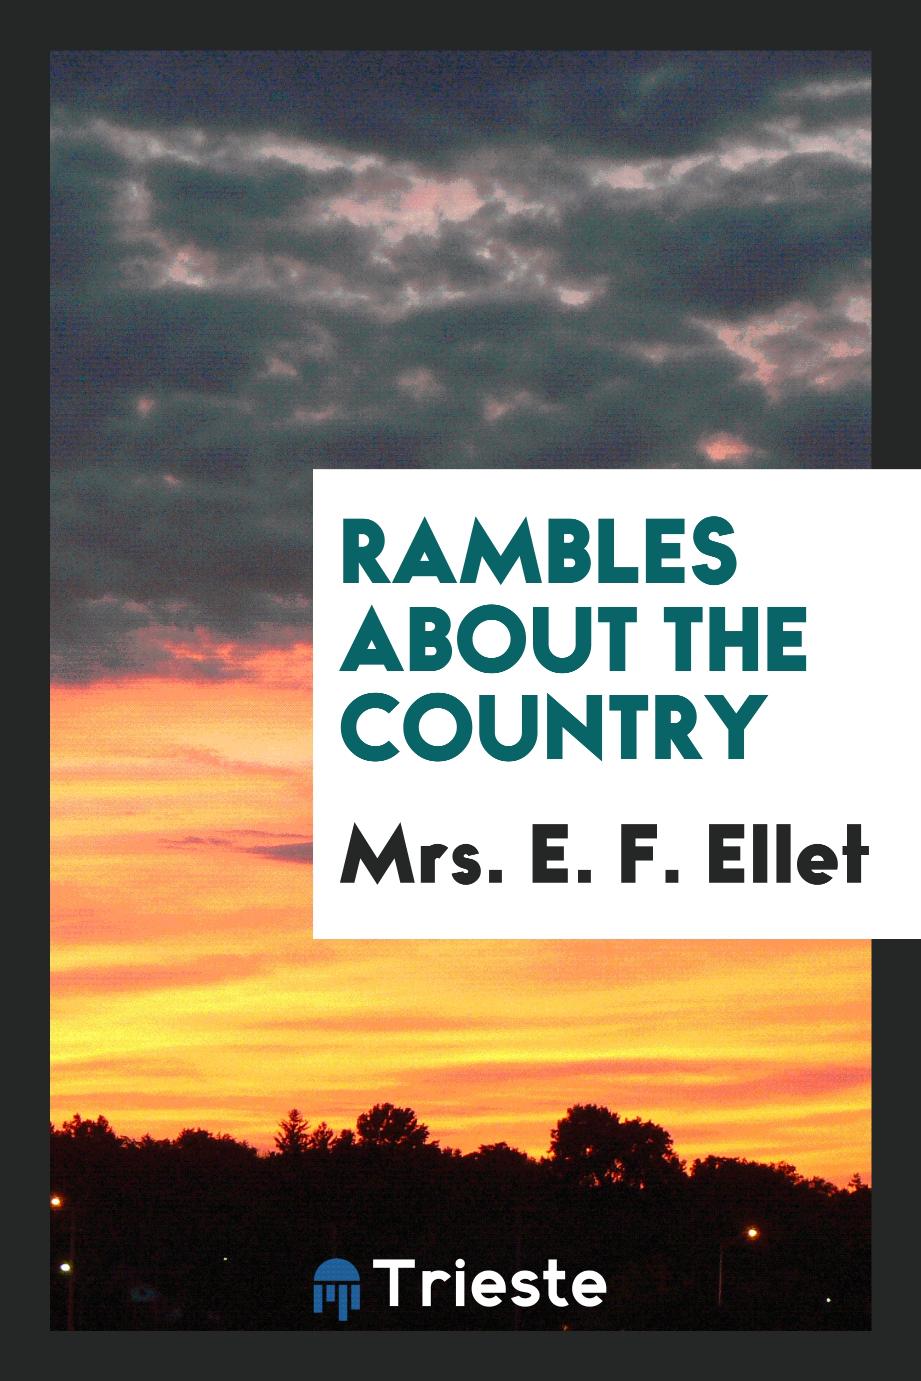 Rambles about the country